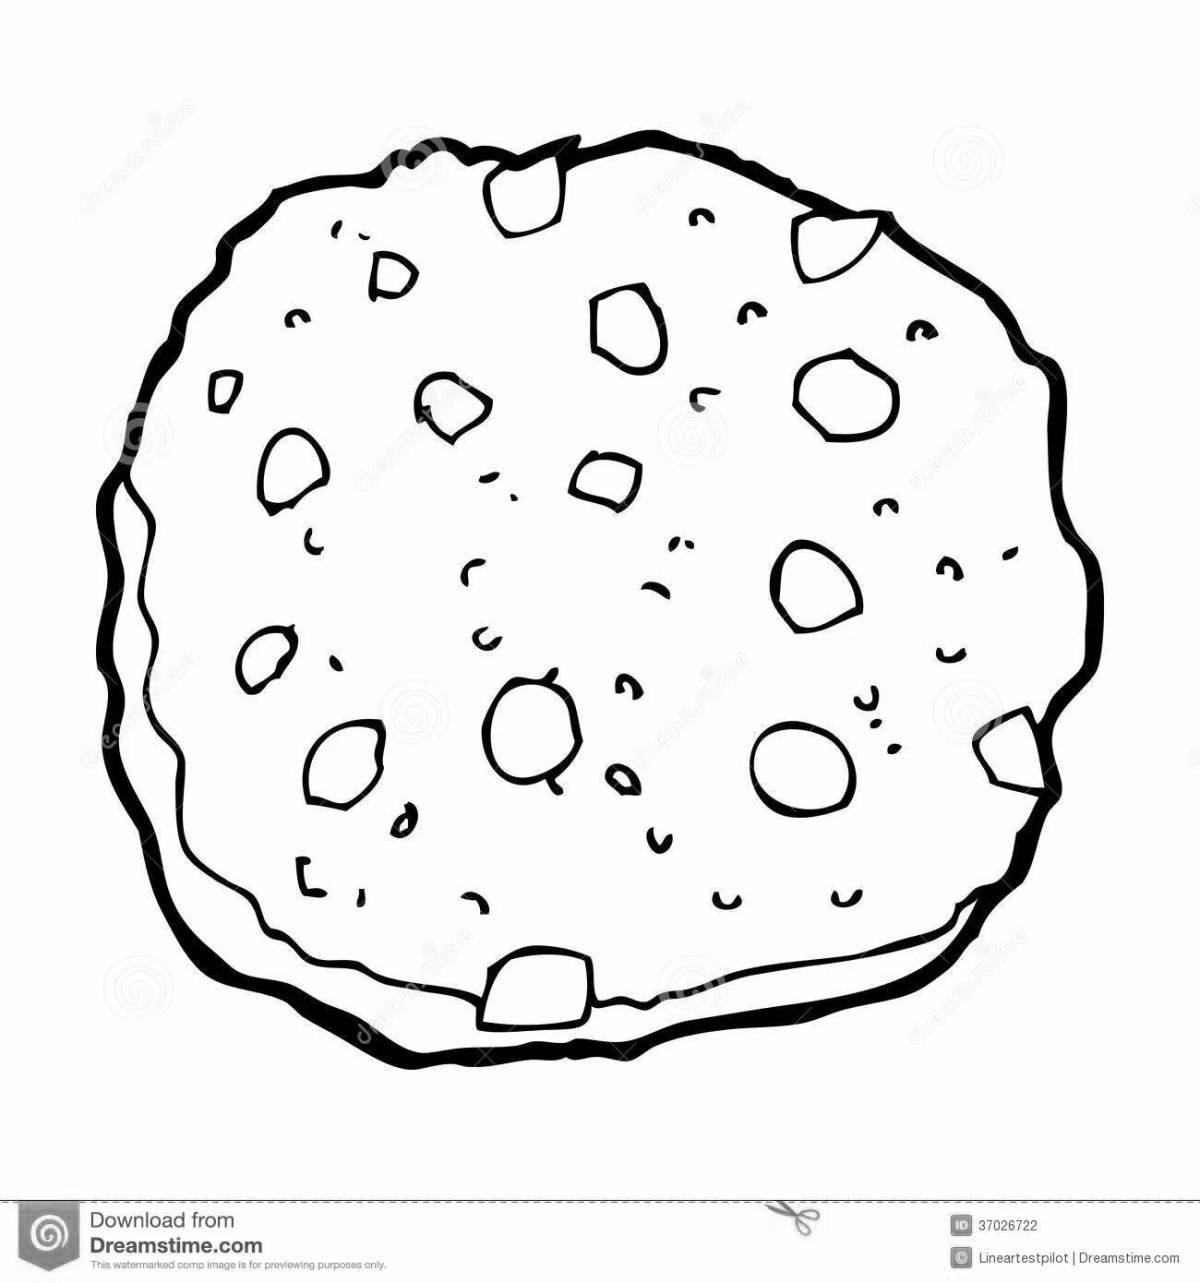 Animated lavash coloring page